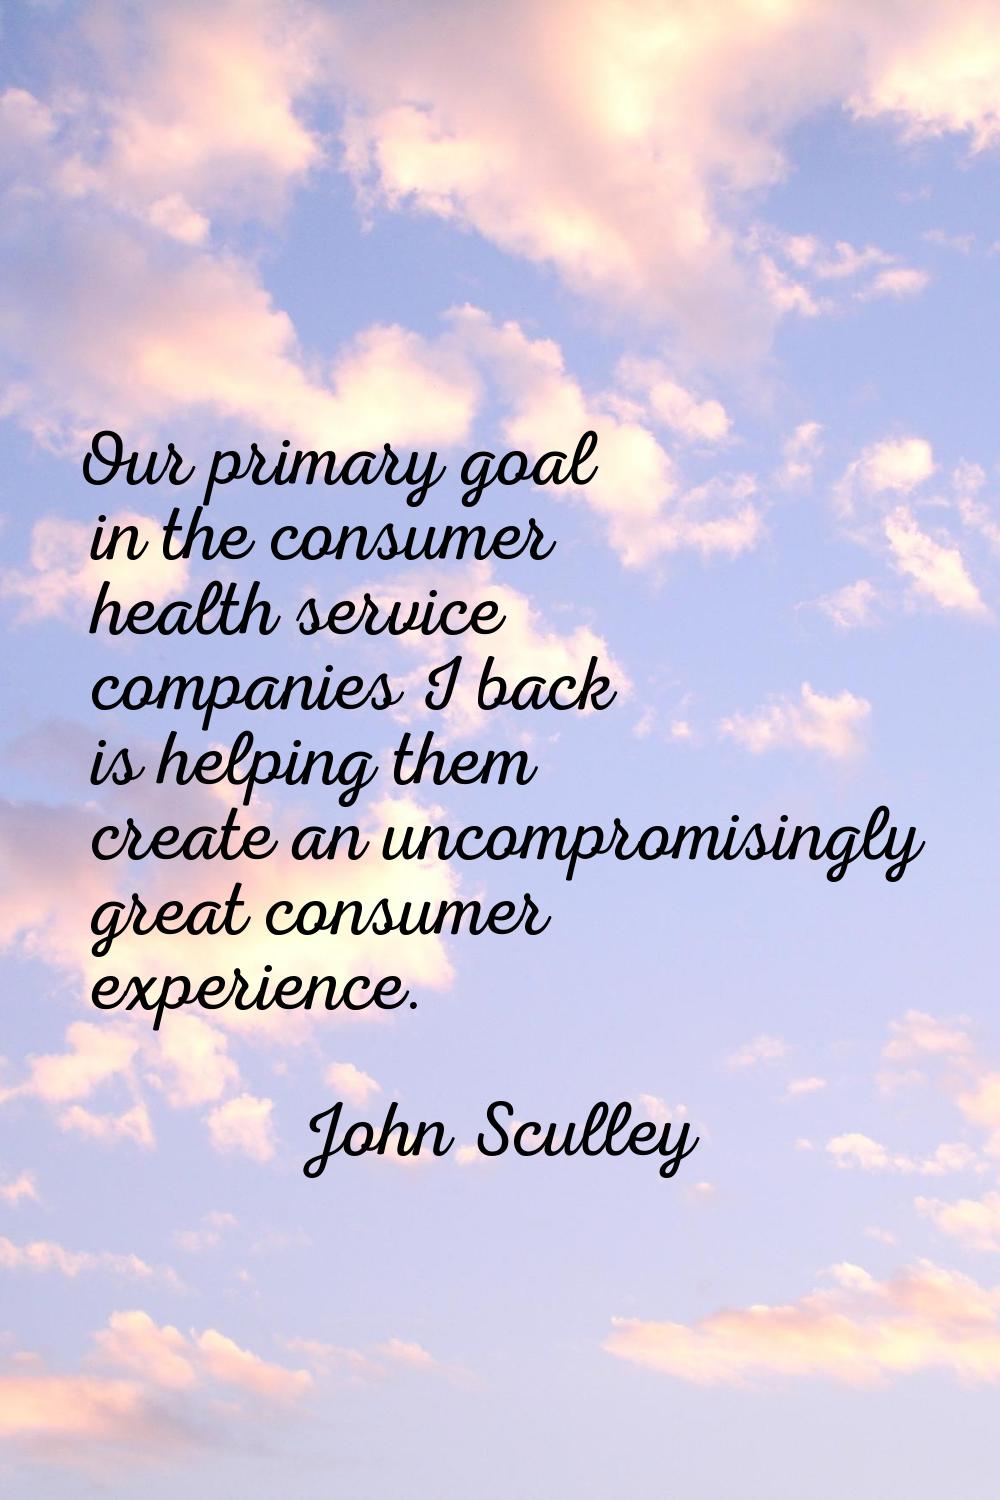 Our primary goal in the consumer health service companies I back is helping them create an uncompro